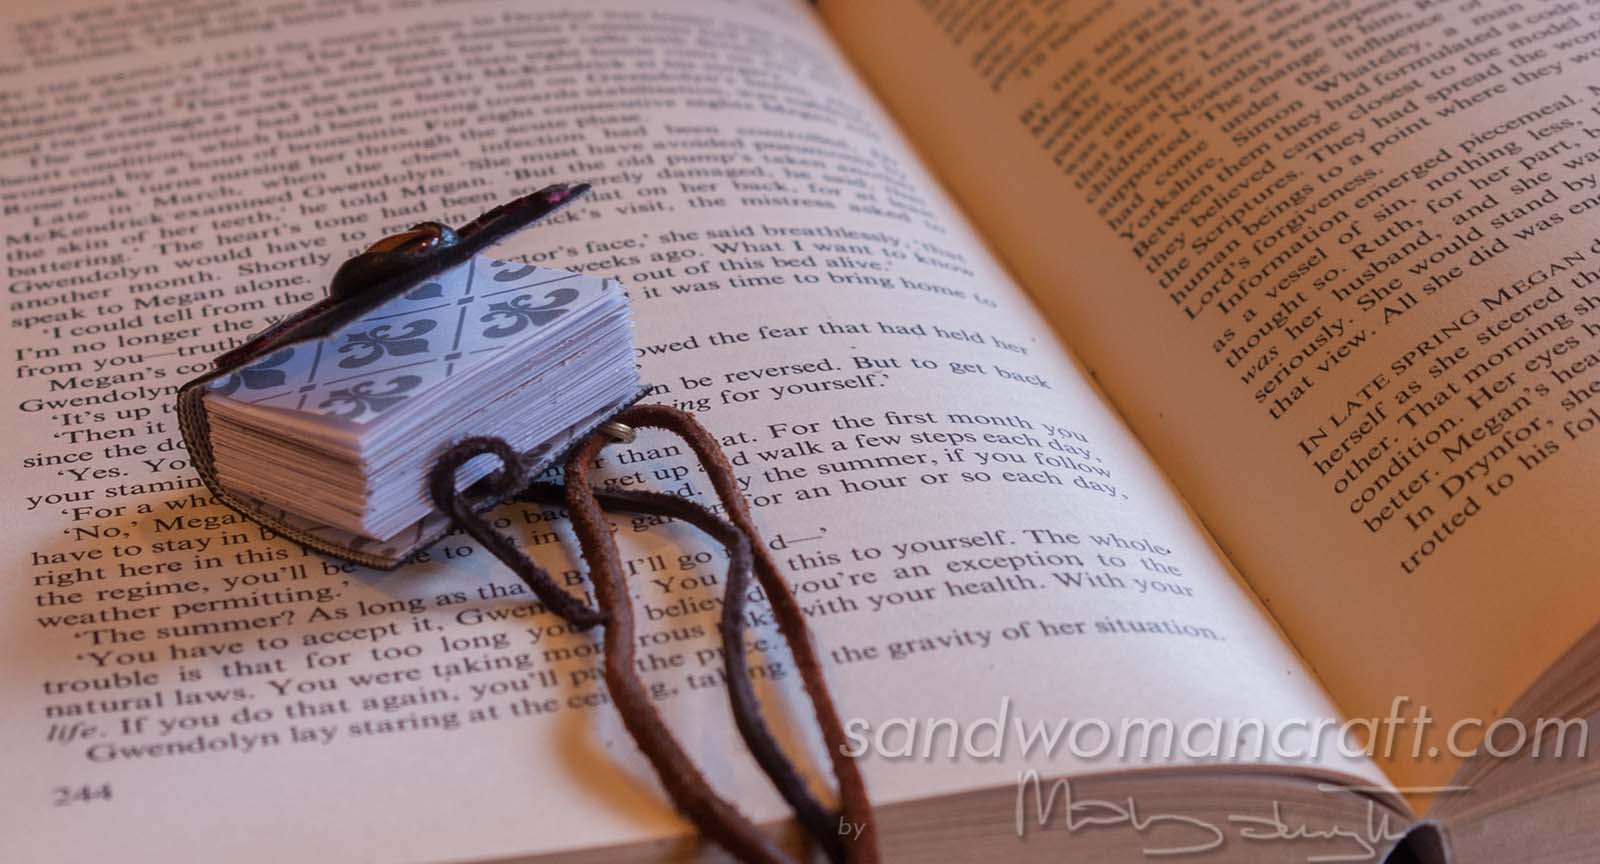 Miniature leather book necklace with real book to read inside. Da Vinci theme